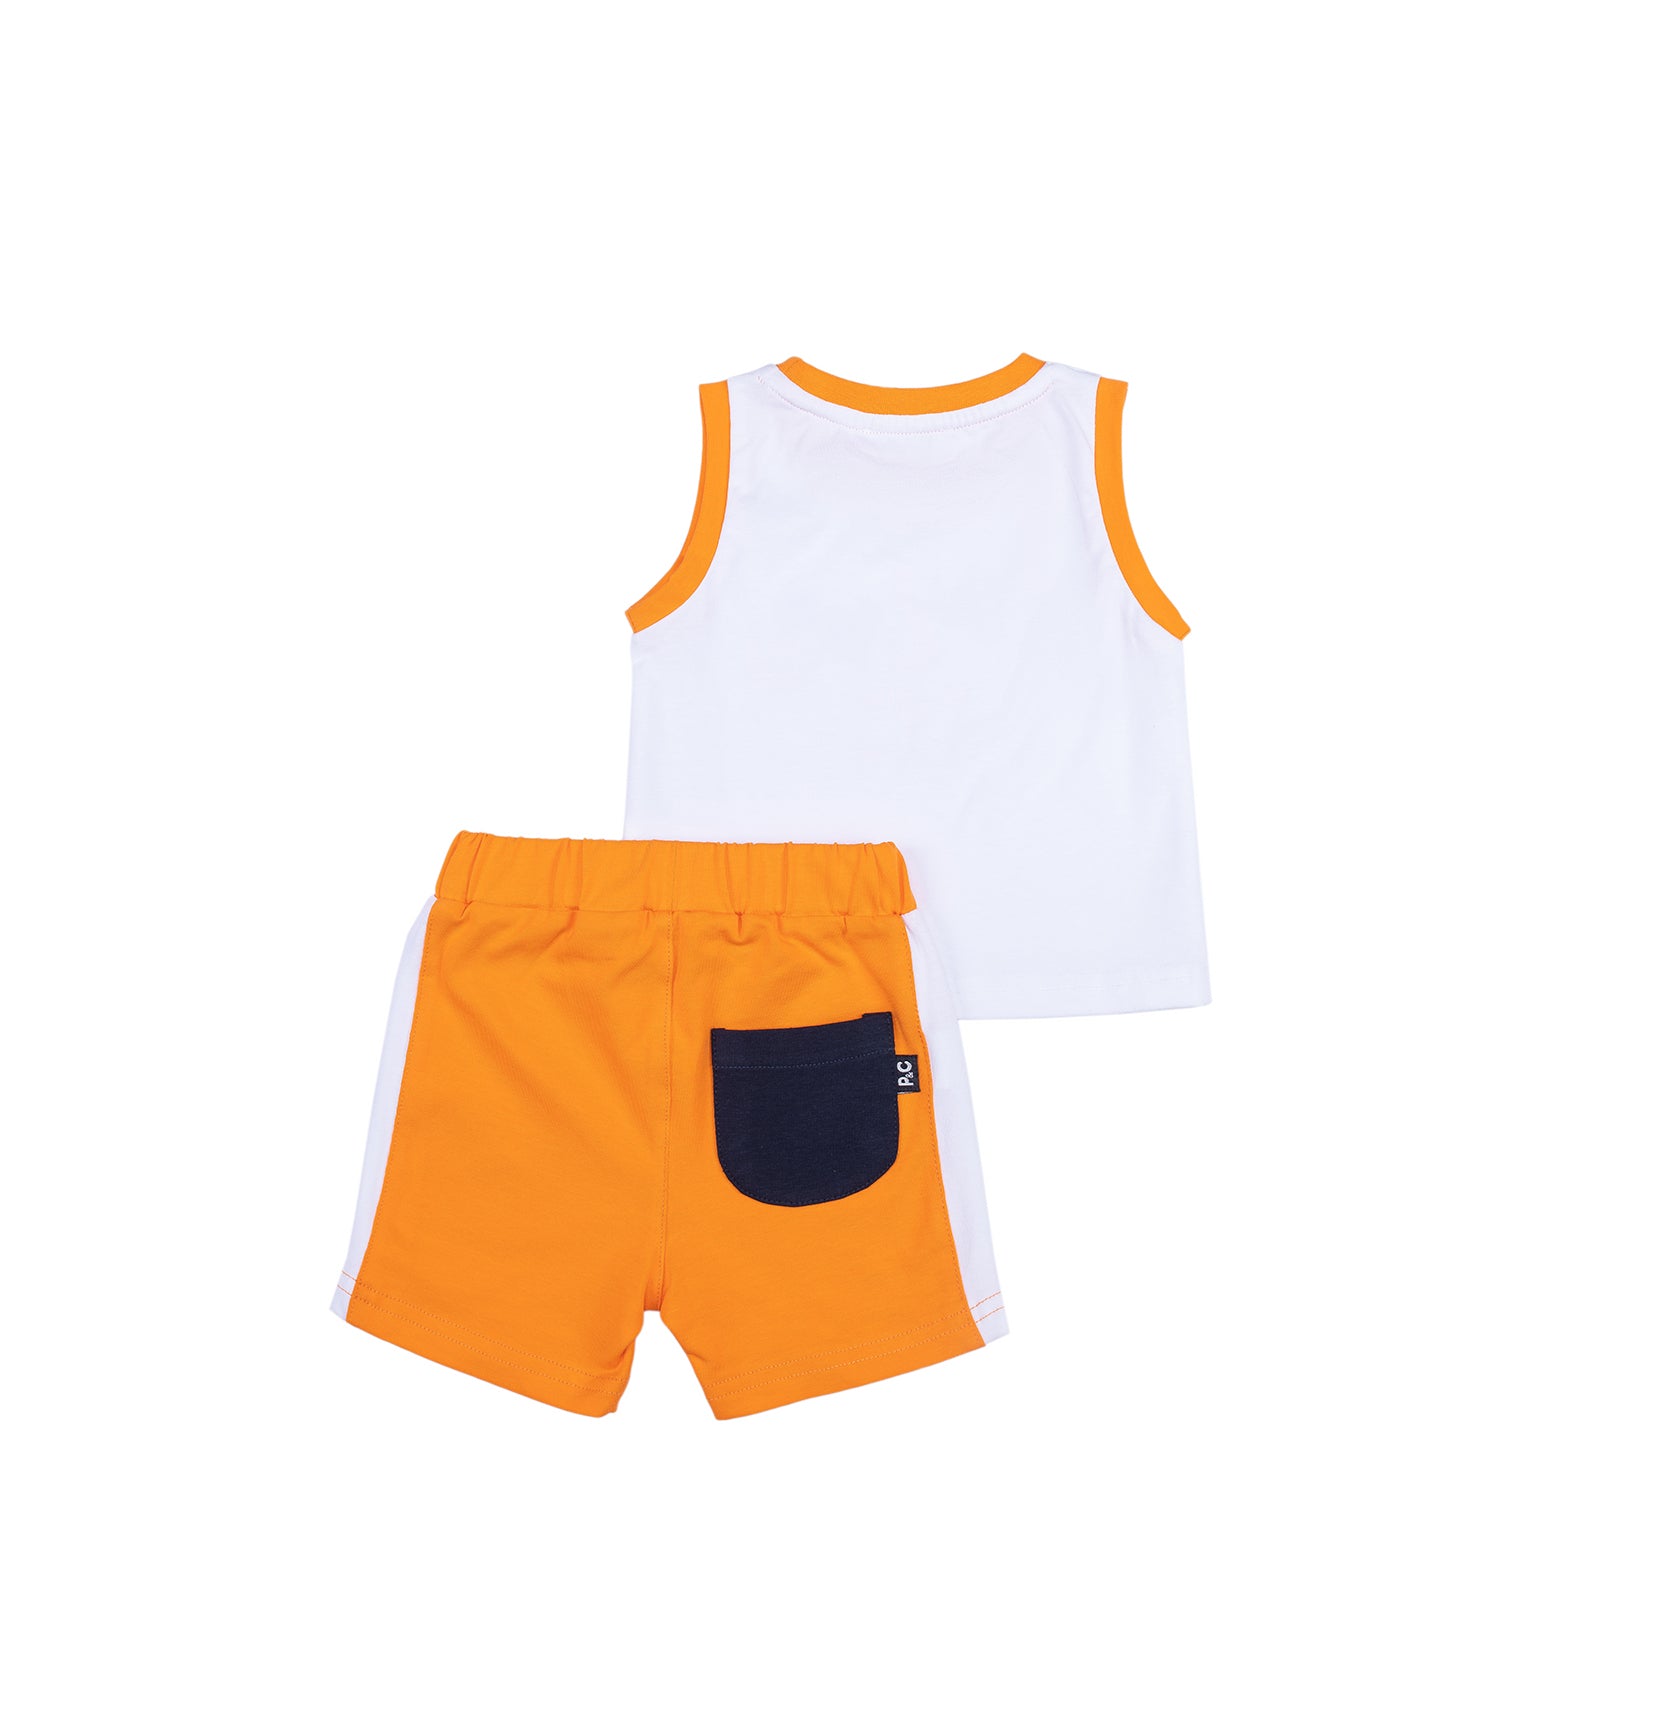 Colorful Babyboy top and short set by Pompelo